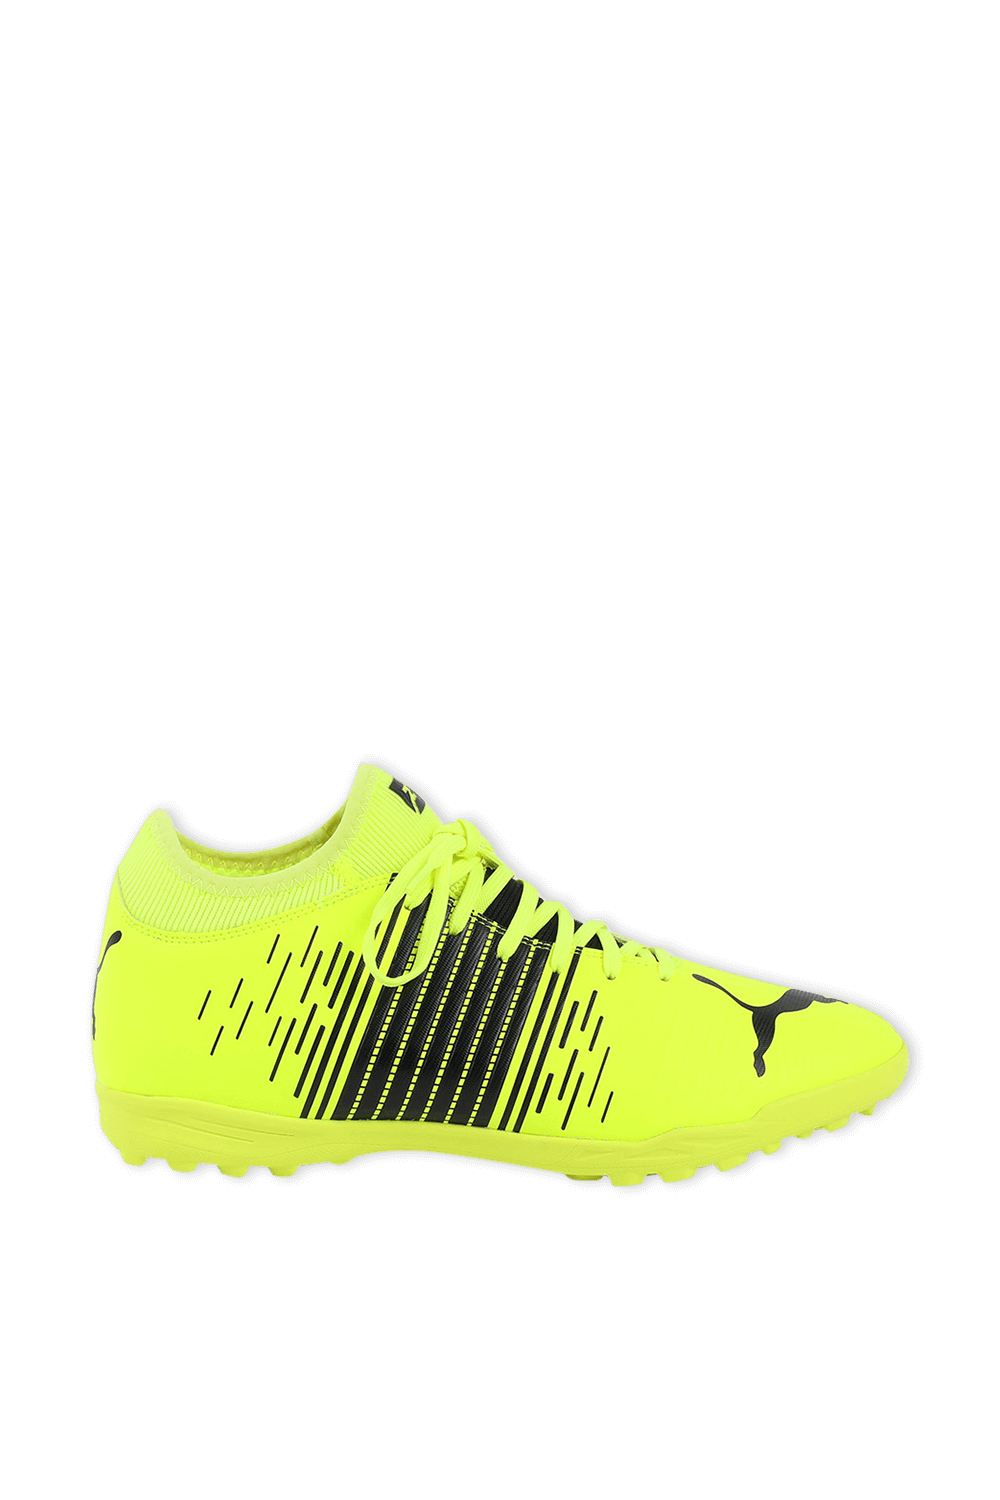 Future Z 4.1 Football Boots in Yellow PUMA